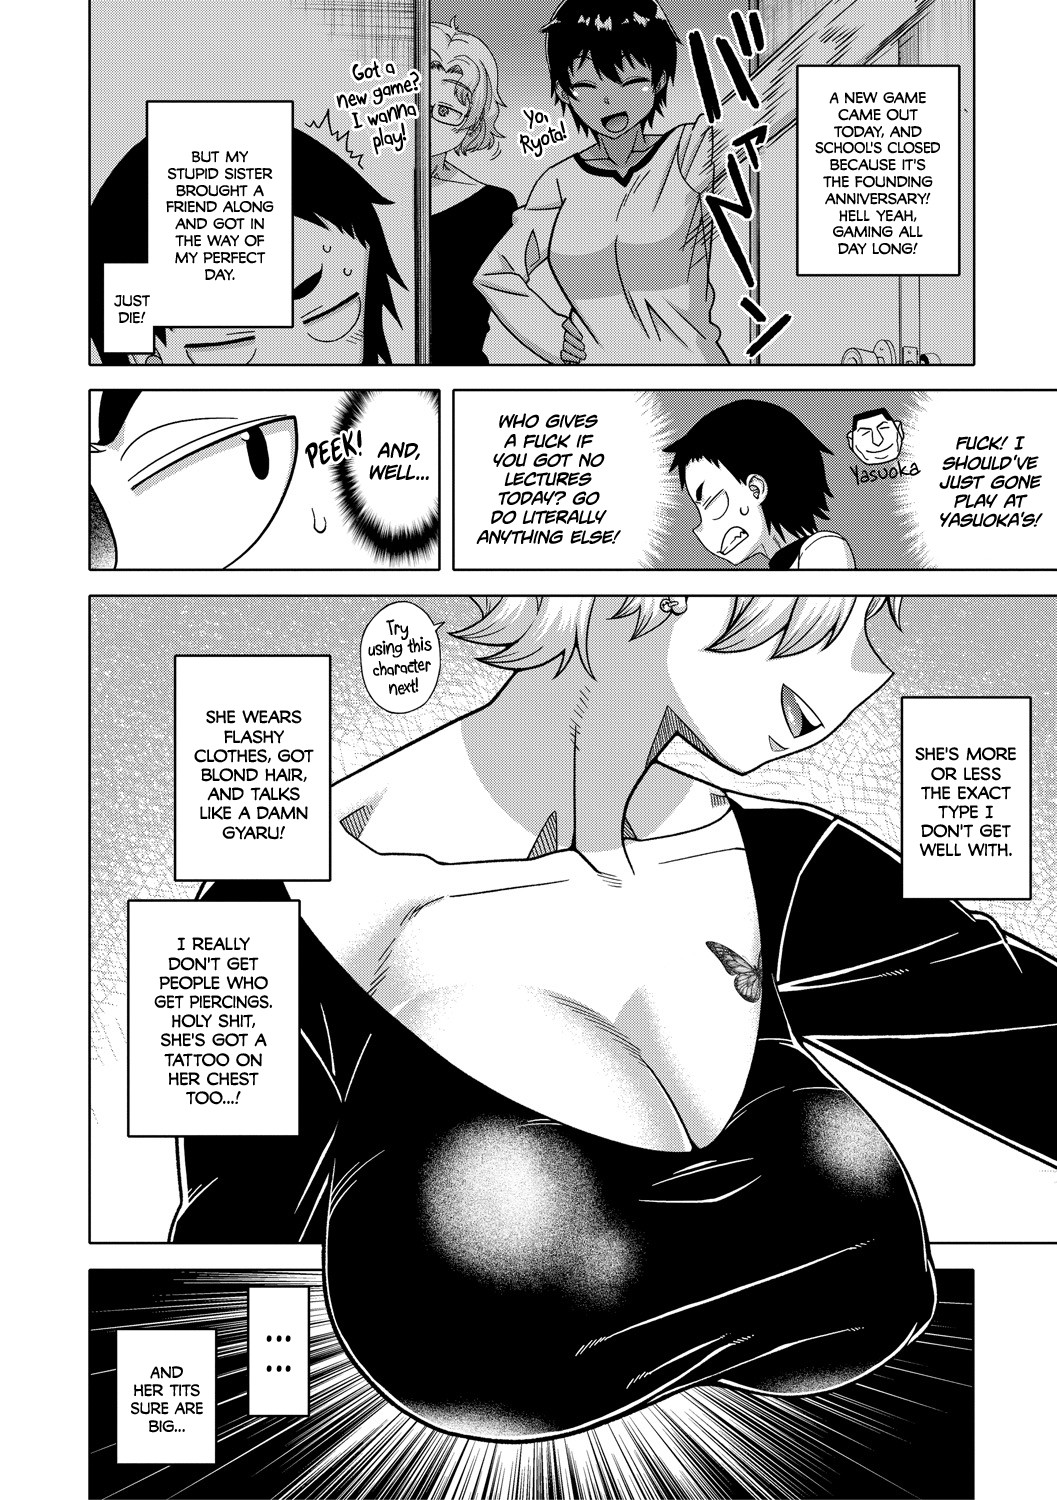 Hentai Manga Comic-My Stupid Older Sister Who's Just a Bit Hot Because Of Her Large Breasts-Chapter 4-2